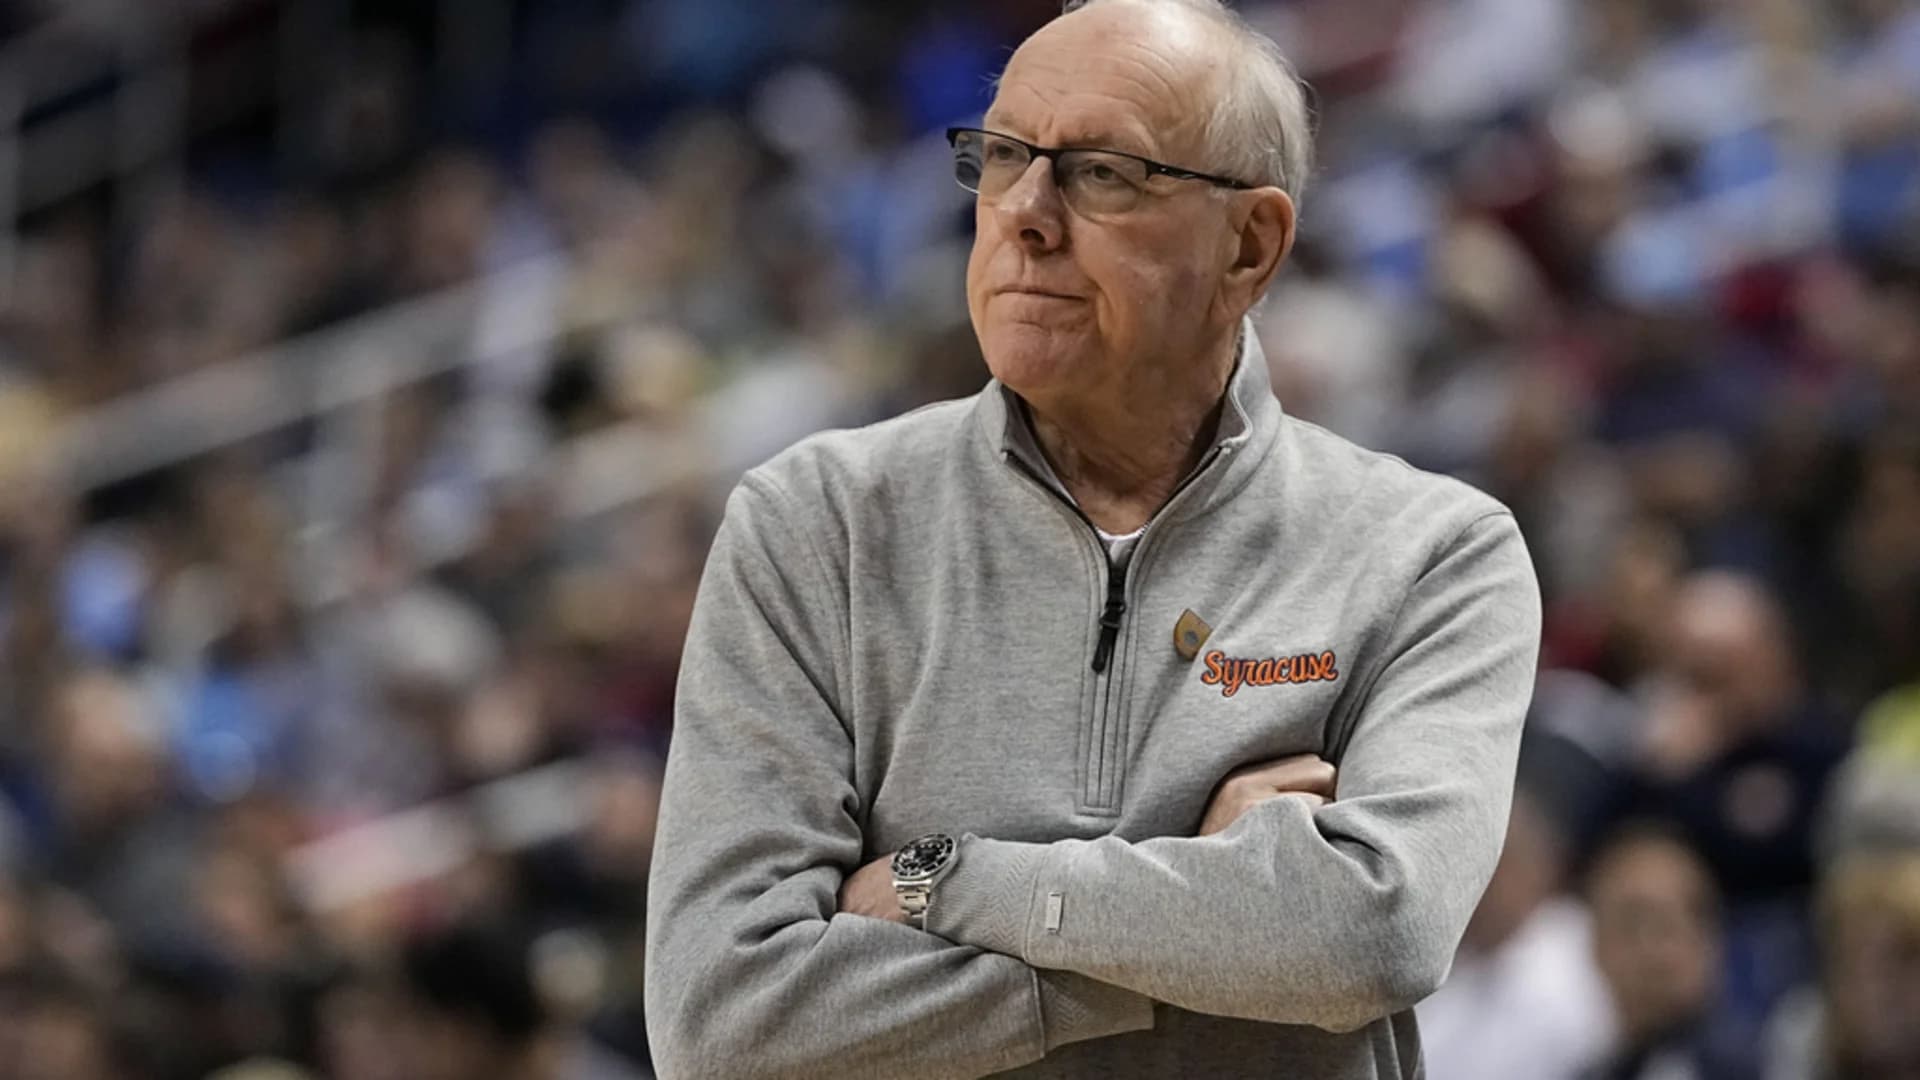 Jim Boeheim’s long career at Syracuse ends, Autry takes over